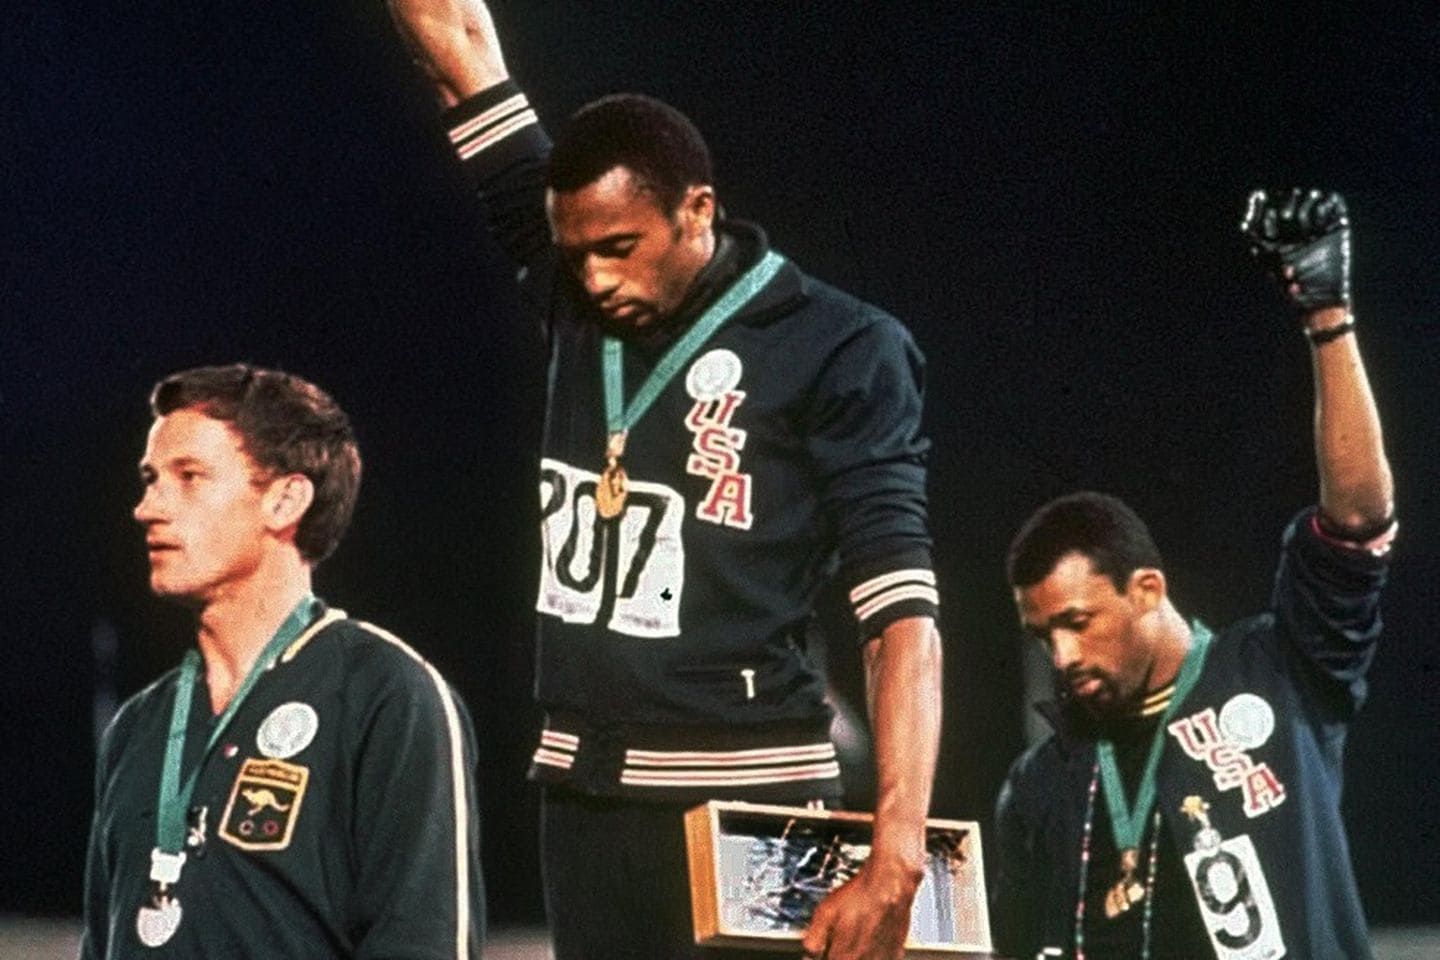 American track and field athletes Tommie Smith (C) and John Carlos (R), protest with the Black Power salute at the Summer Olympic games, Mexico City, Mexico, October 19, 1968. John Dominis/The LIFE Picture Collection via Getty Images 1968: John Carlos and Tommie Smith raise their fists in the Black Power salute